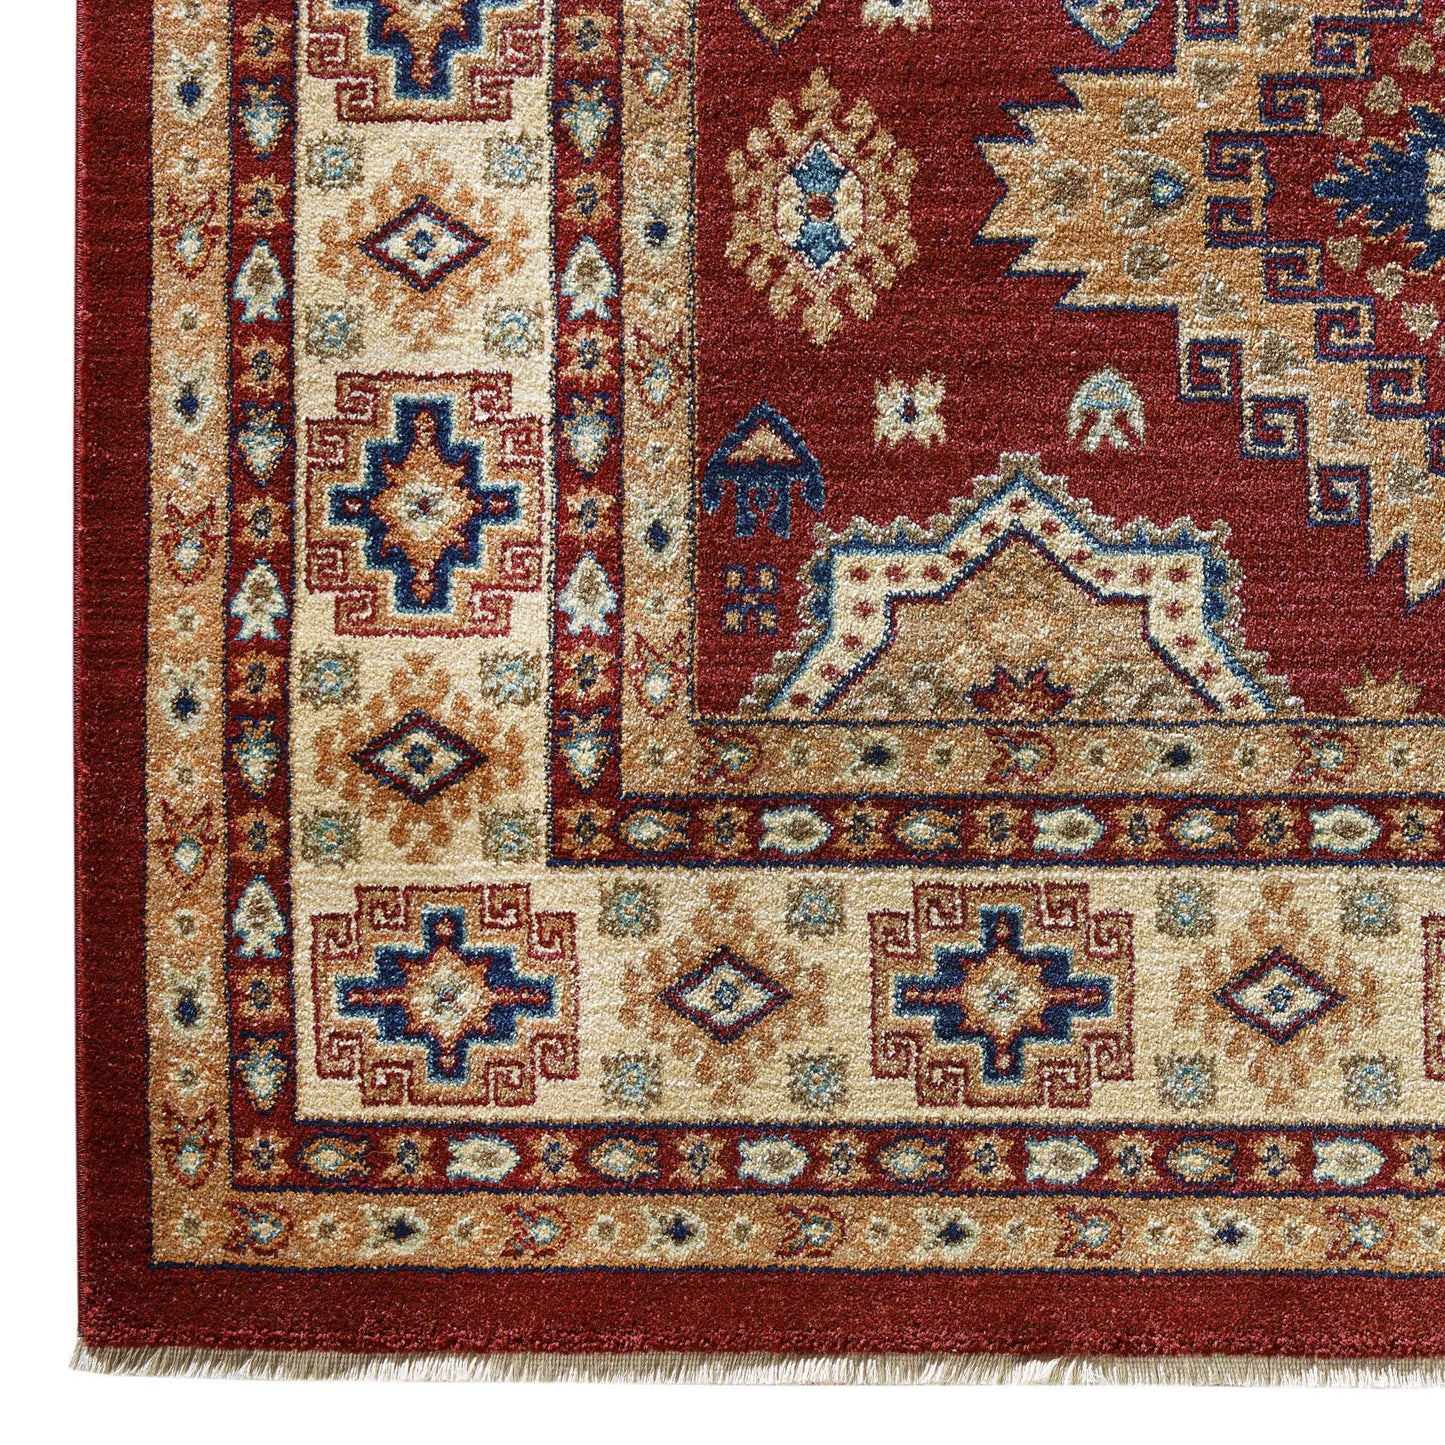 Persia Tribal in Red & Cream Rug